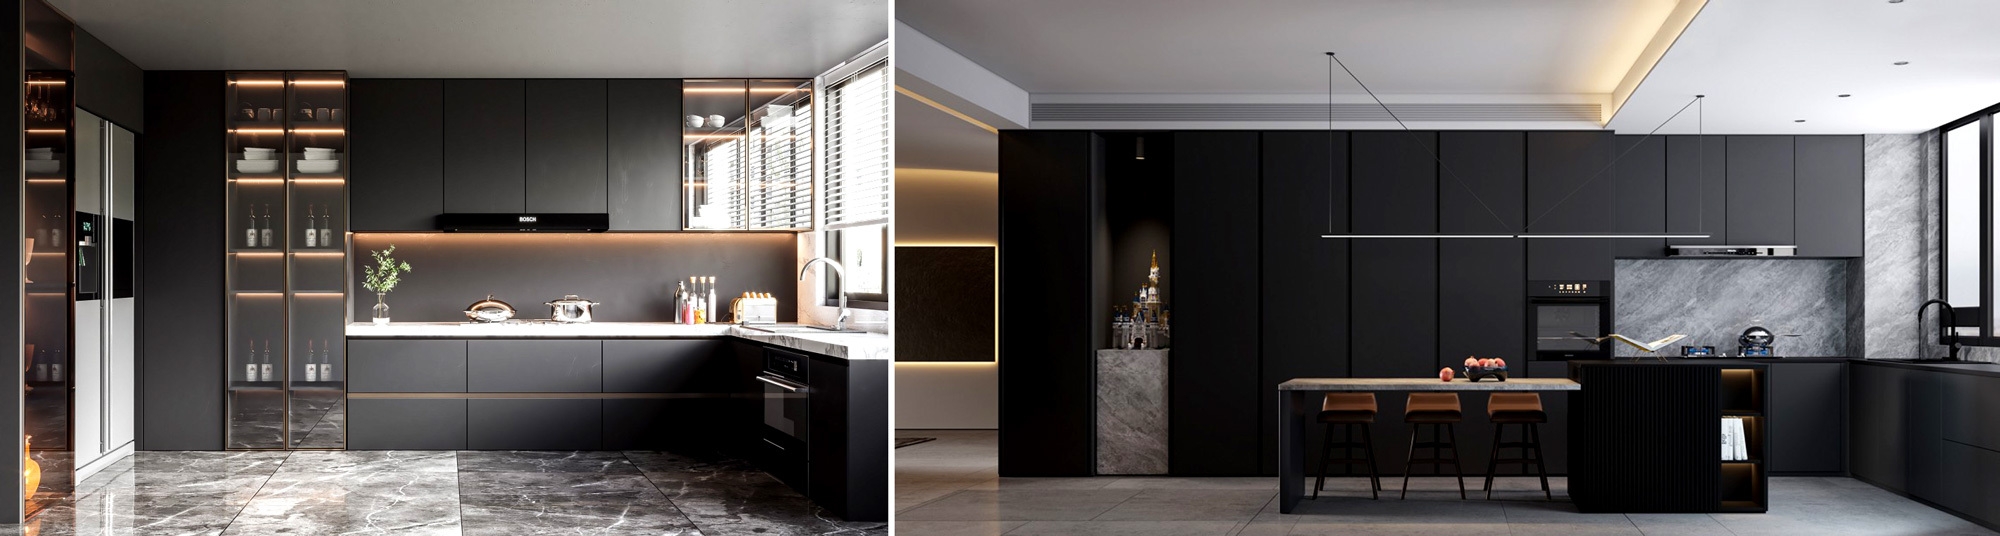 Black cabinets and grey walls style